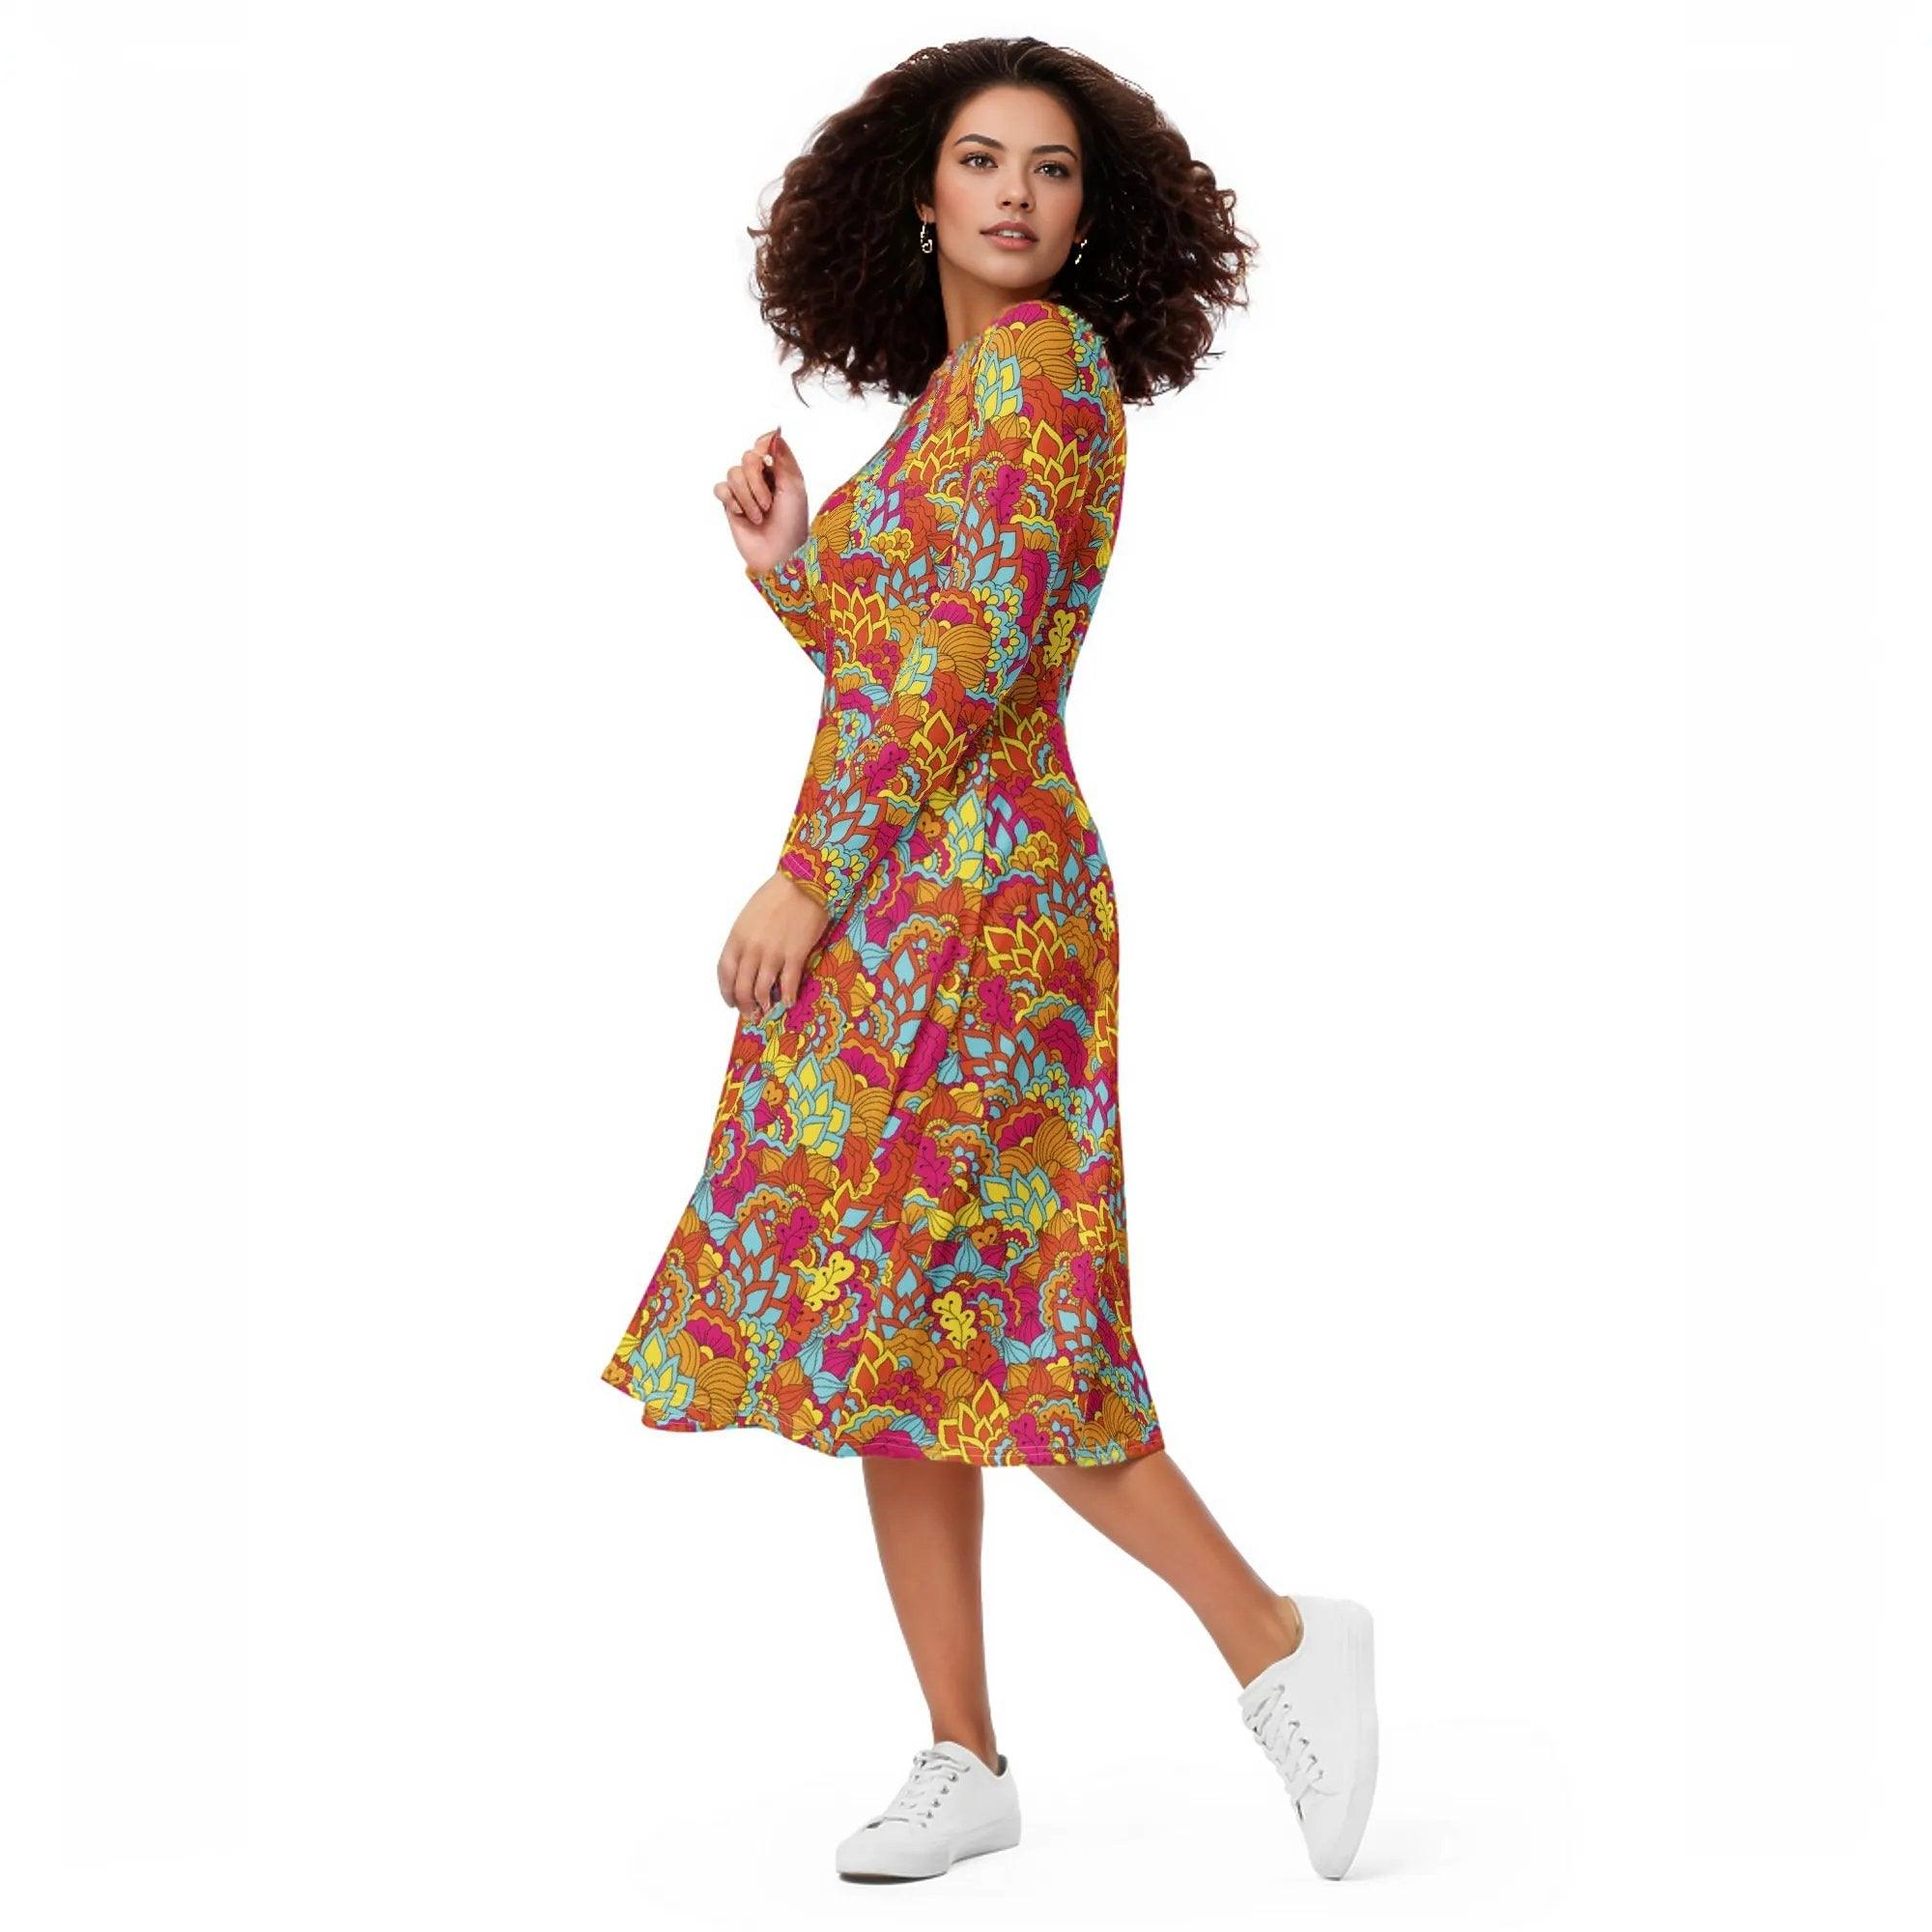 Inela Flower Power Retro Long Sleeve Fit & Flare Midi Dress Psychedelic Paisley Floral Red Yellow Orange Vibrant Bold Plus Size Pockets Round Neck 